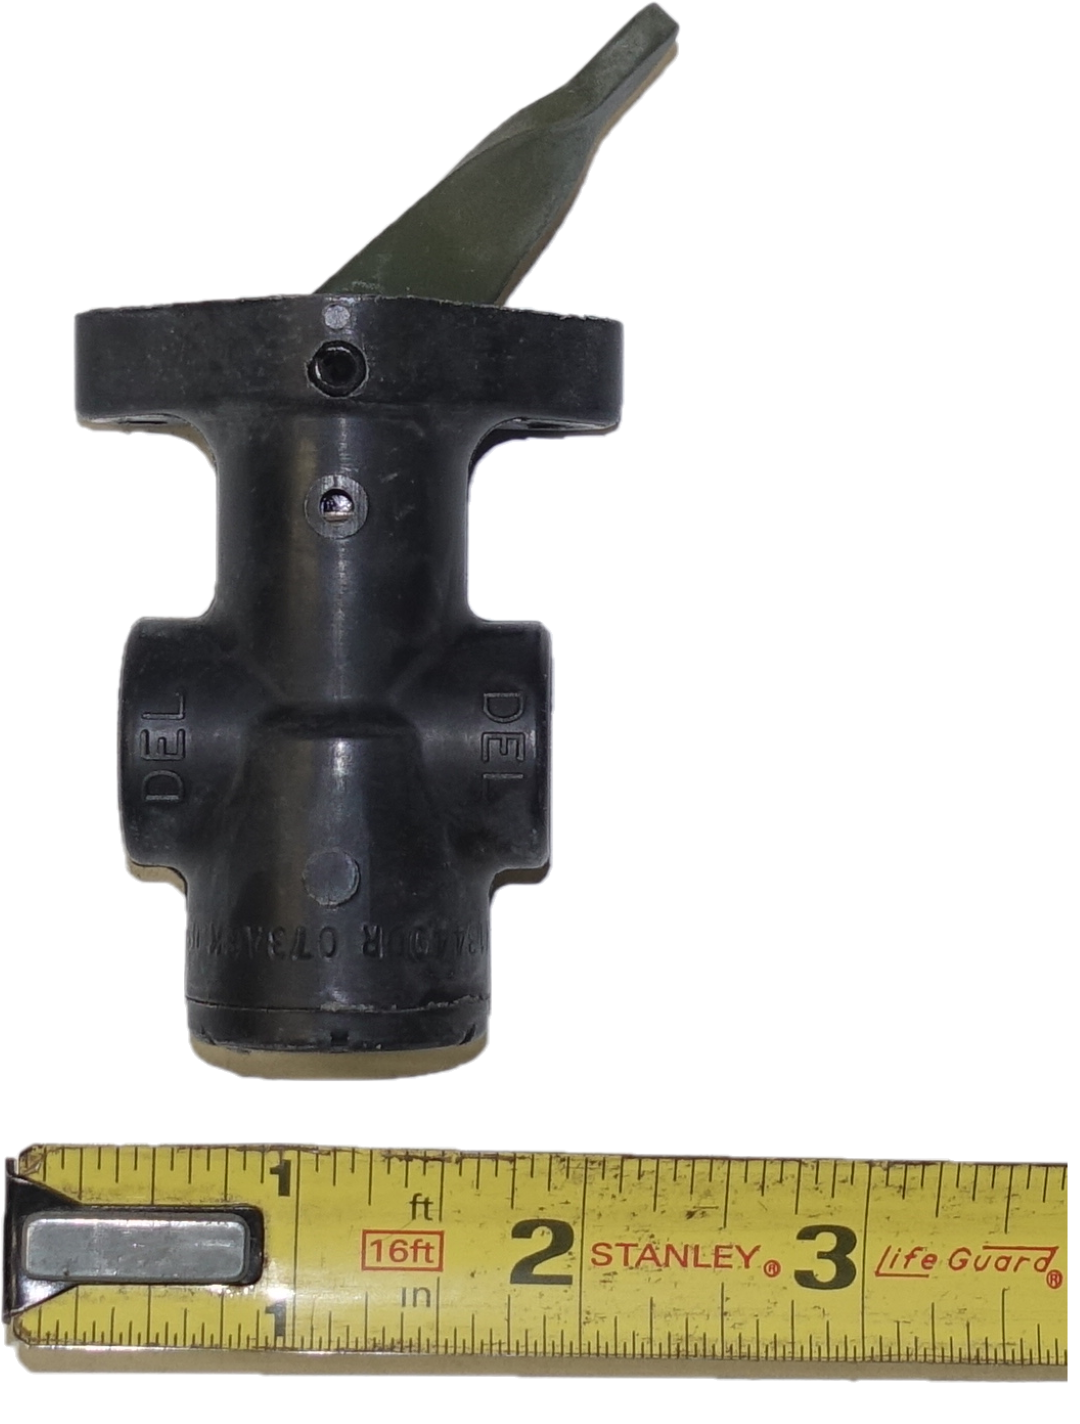 COM-3222 | COM-3222 Transfercase Air Actuating Switch (1) (Large).png